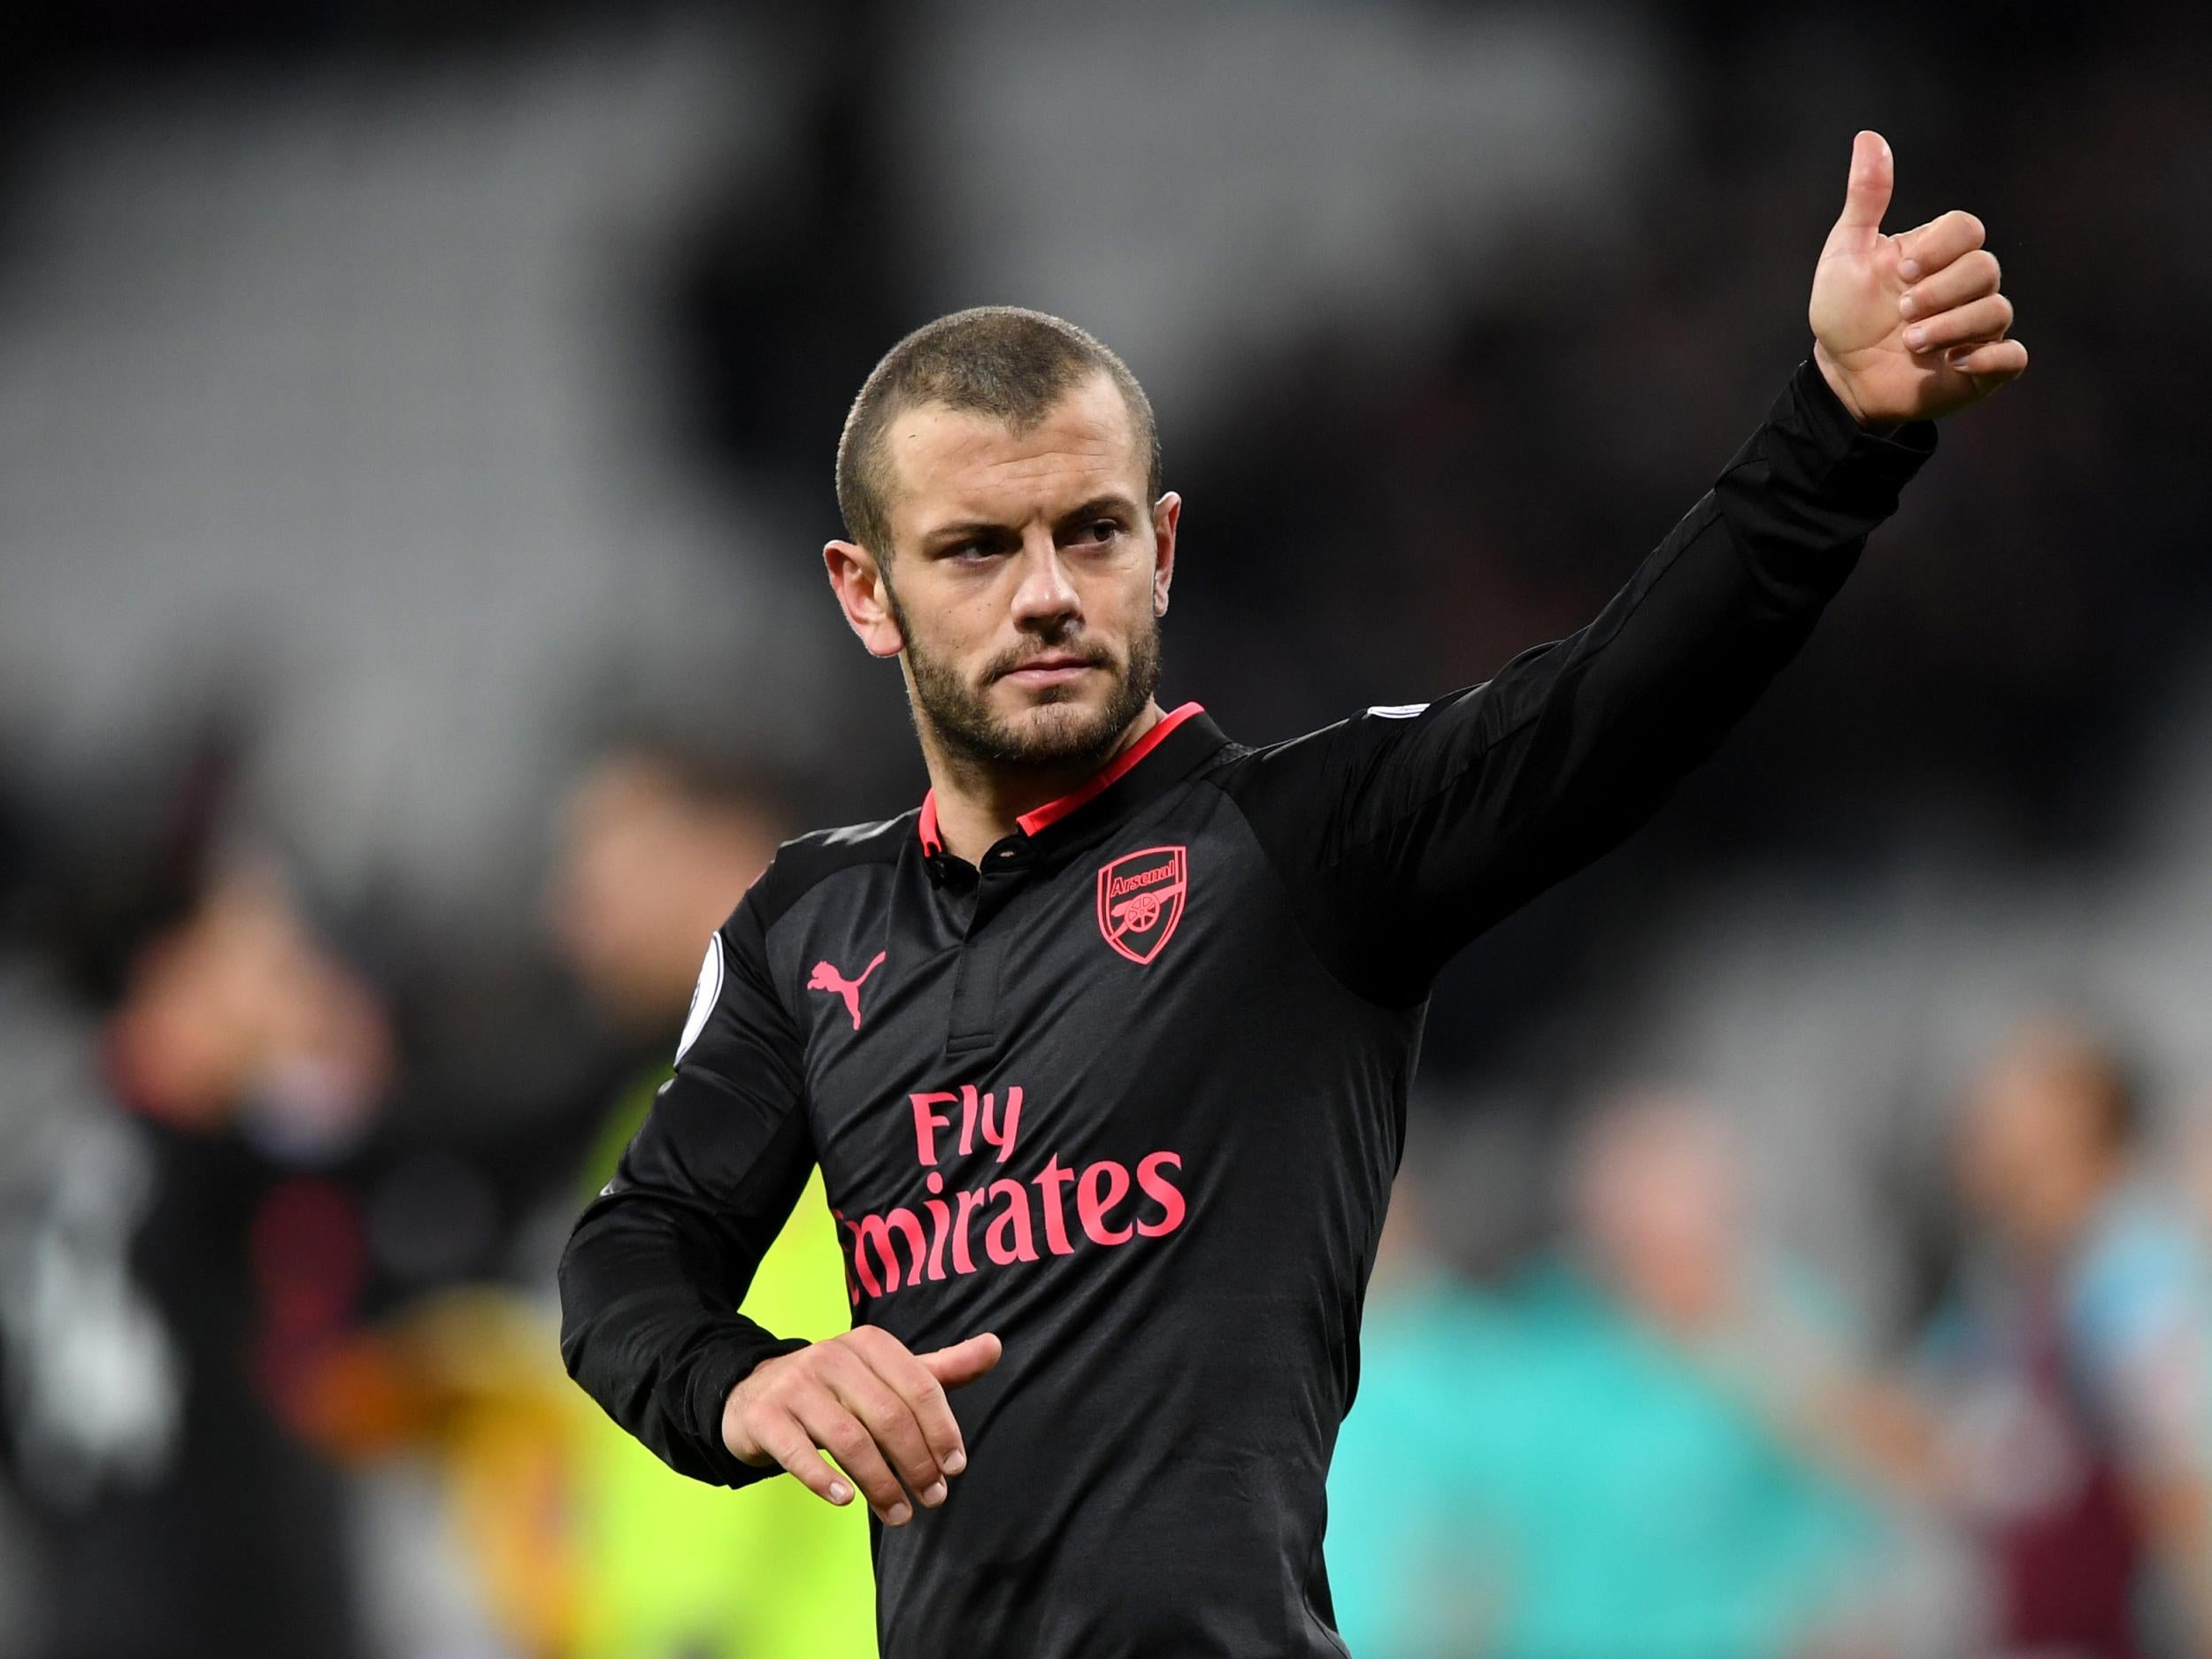 Wilshere may move on in January in search of more playing time